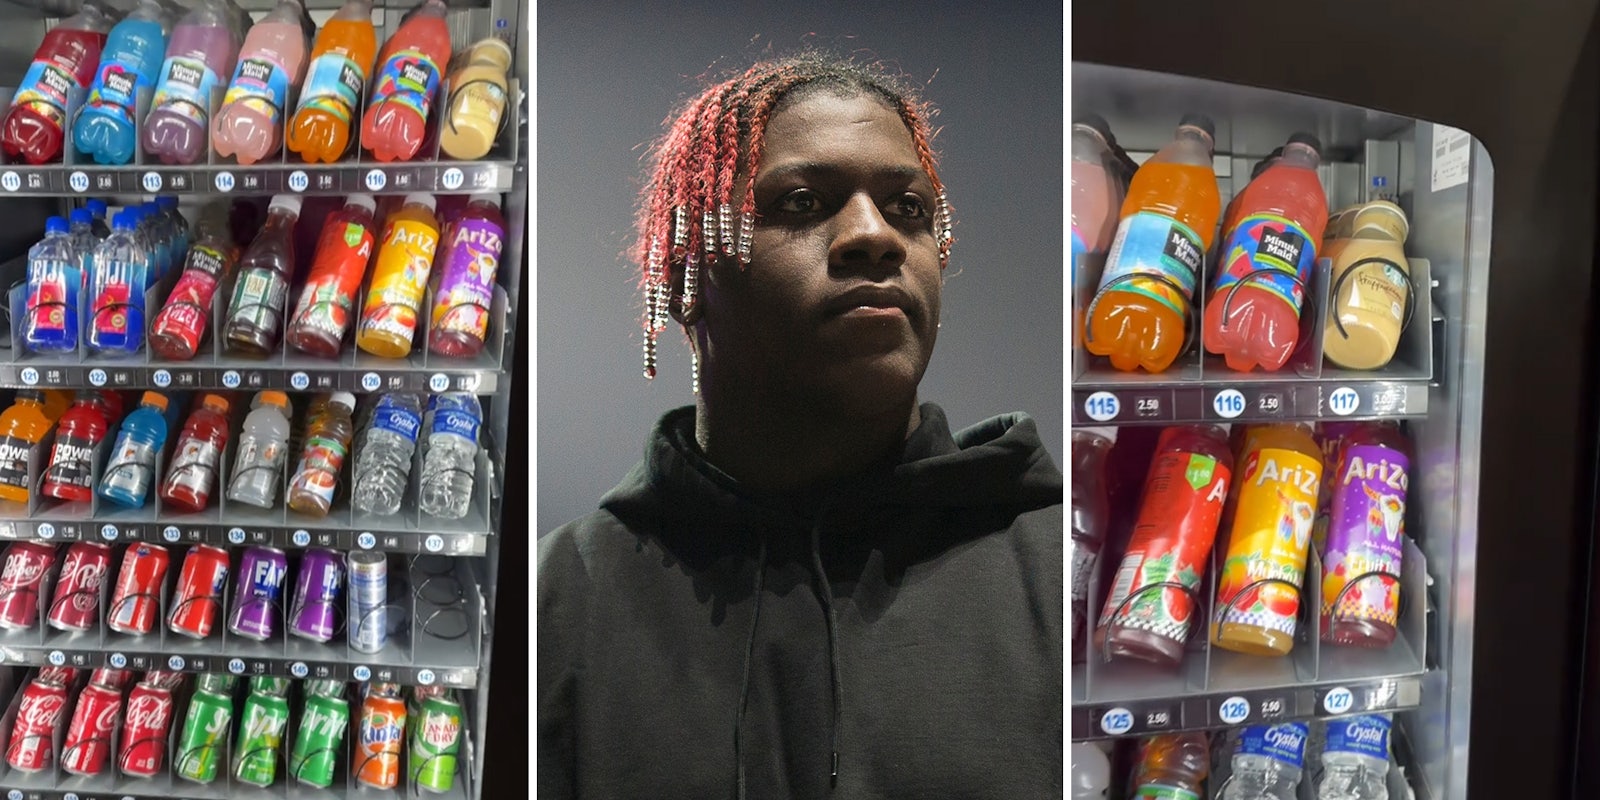 Lil Yachty notices glass Starbucks Frappuccino—in the top row